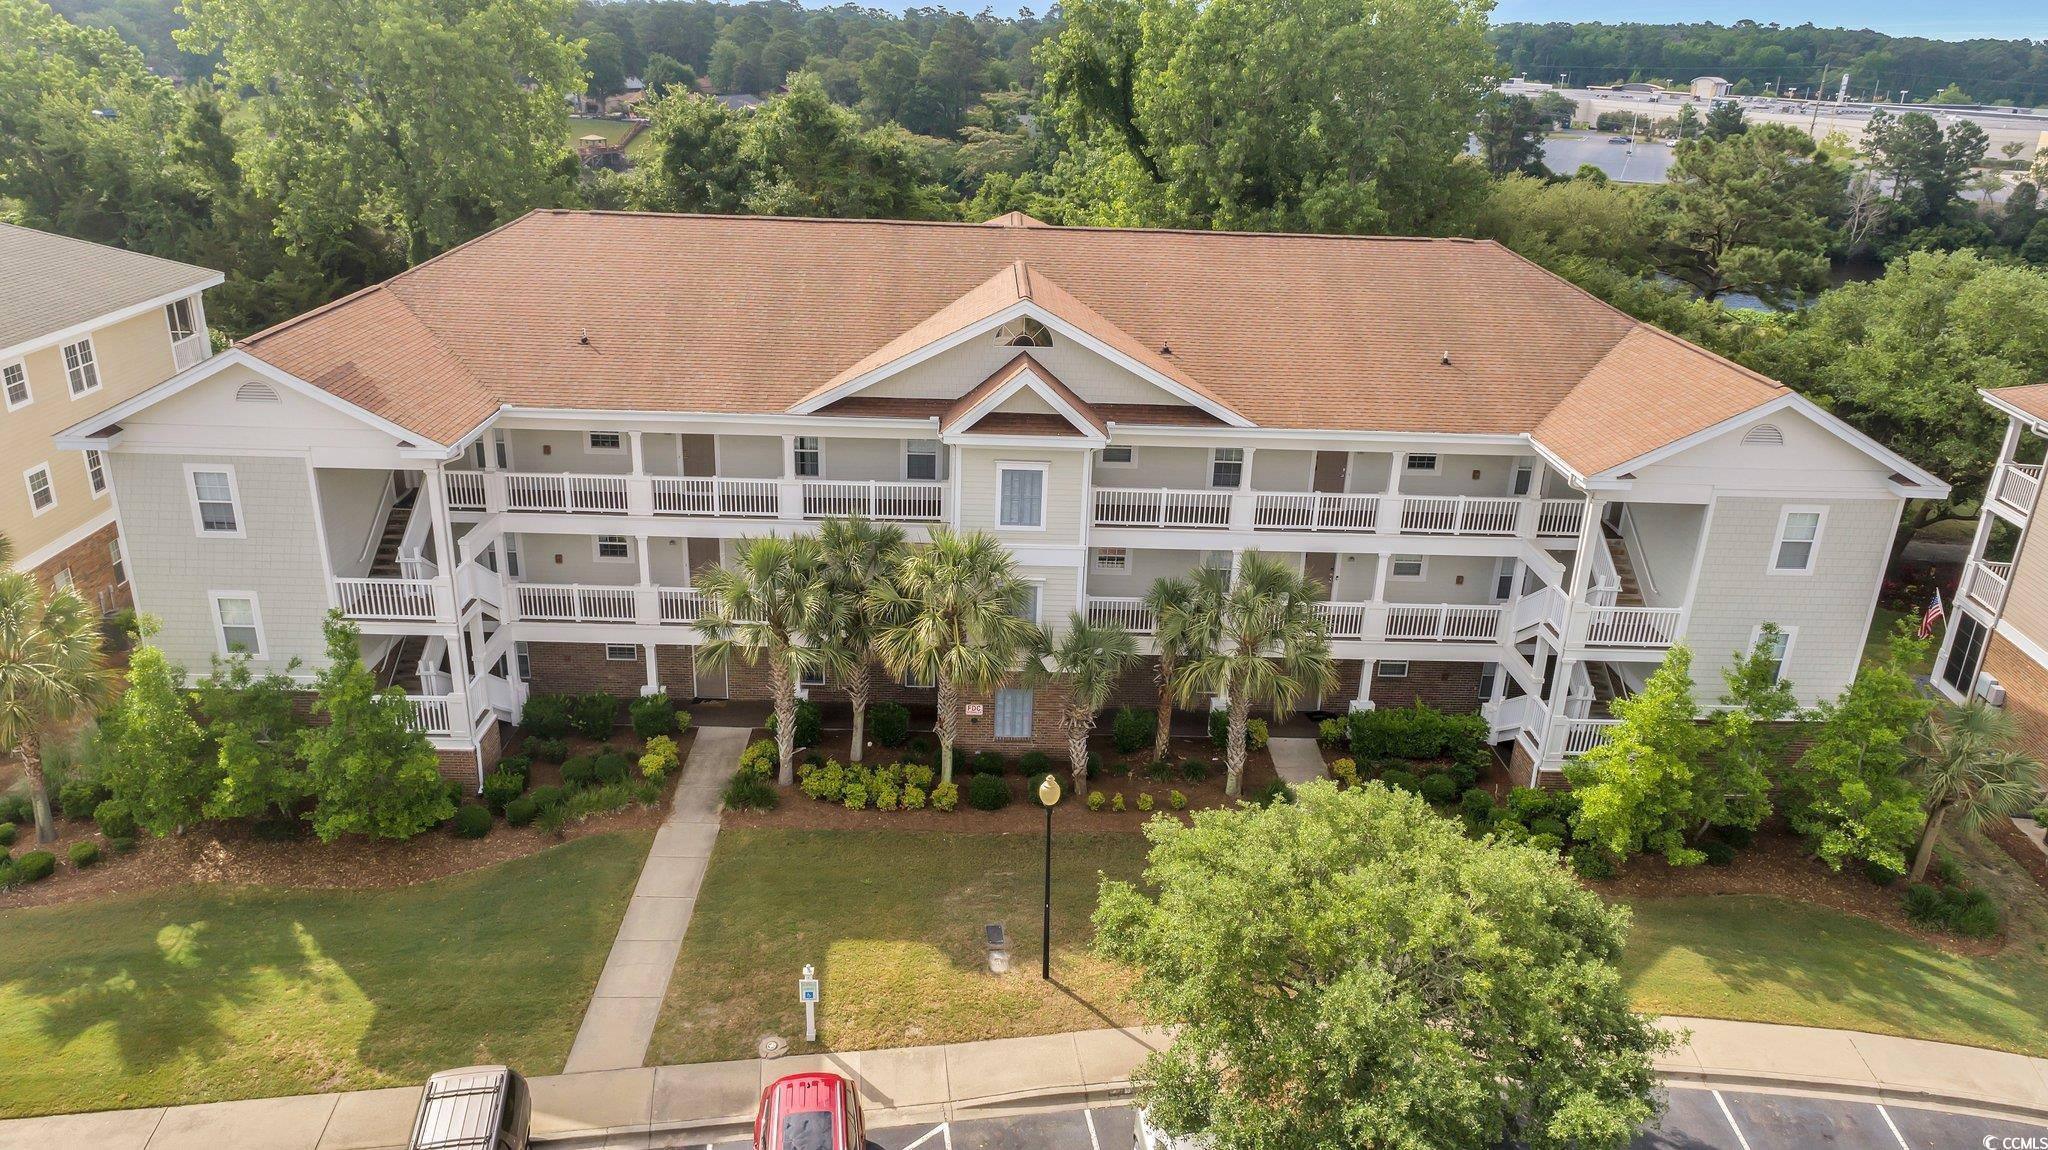 beautiful  fully furnished second floor condo in barefoot resort and golf.  come and enjoy resort living, with great location and amenities, world class golf, tennis courts, beach volleyball, basketball, walking trails...etc. 3 miles from the ocean with private parking, long term renters enjoys beach cabana access. central location to entertainment and golf,  enjoy the near by barefoot landing, alabama theater, house of blues, near by mini golf, and the grand strand over 100 golf courses. close to shopping centers, entertainment, world class golf courses, mini golf, water activities, beach, clinics and hospitals.  background and credit check is part of the application, and one month security deposit.  renter insurance is required. all utilities, cable and internet are included.